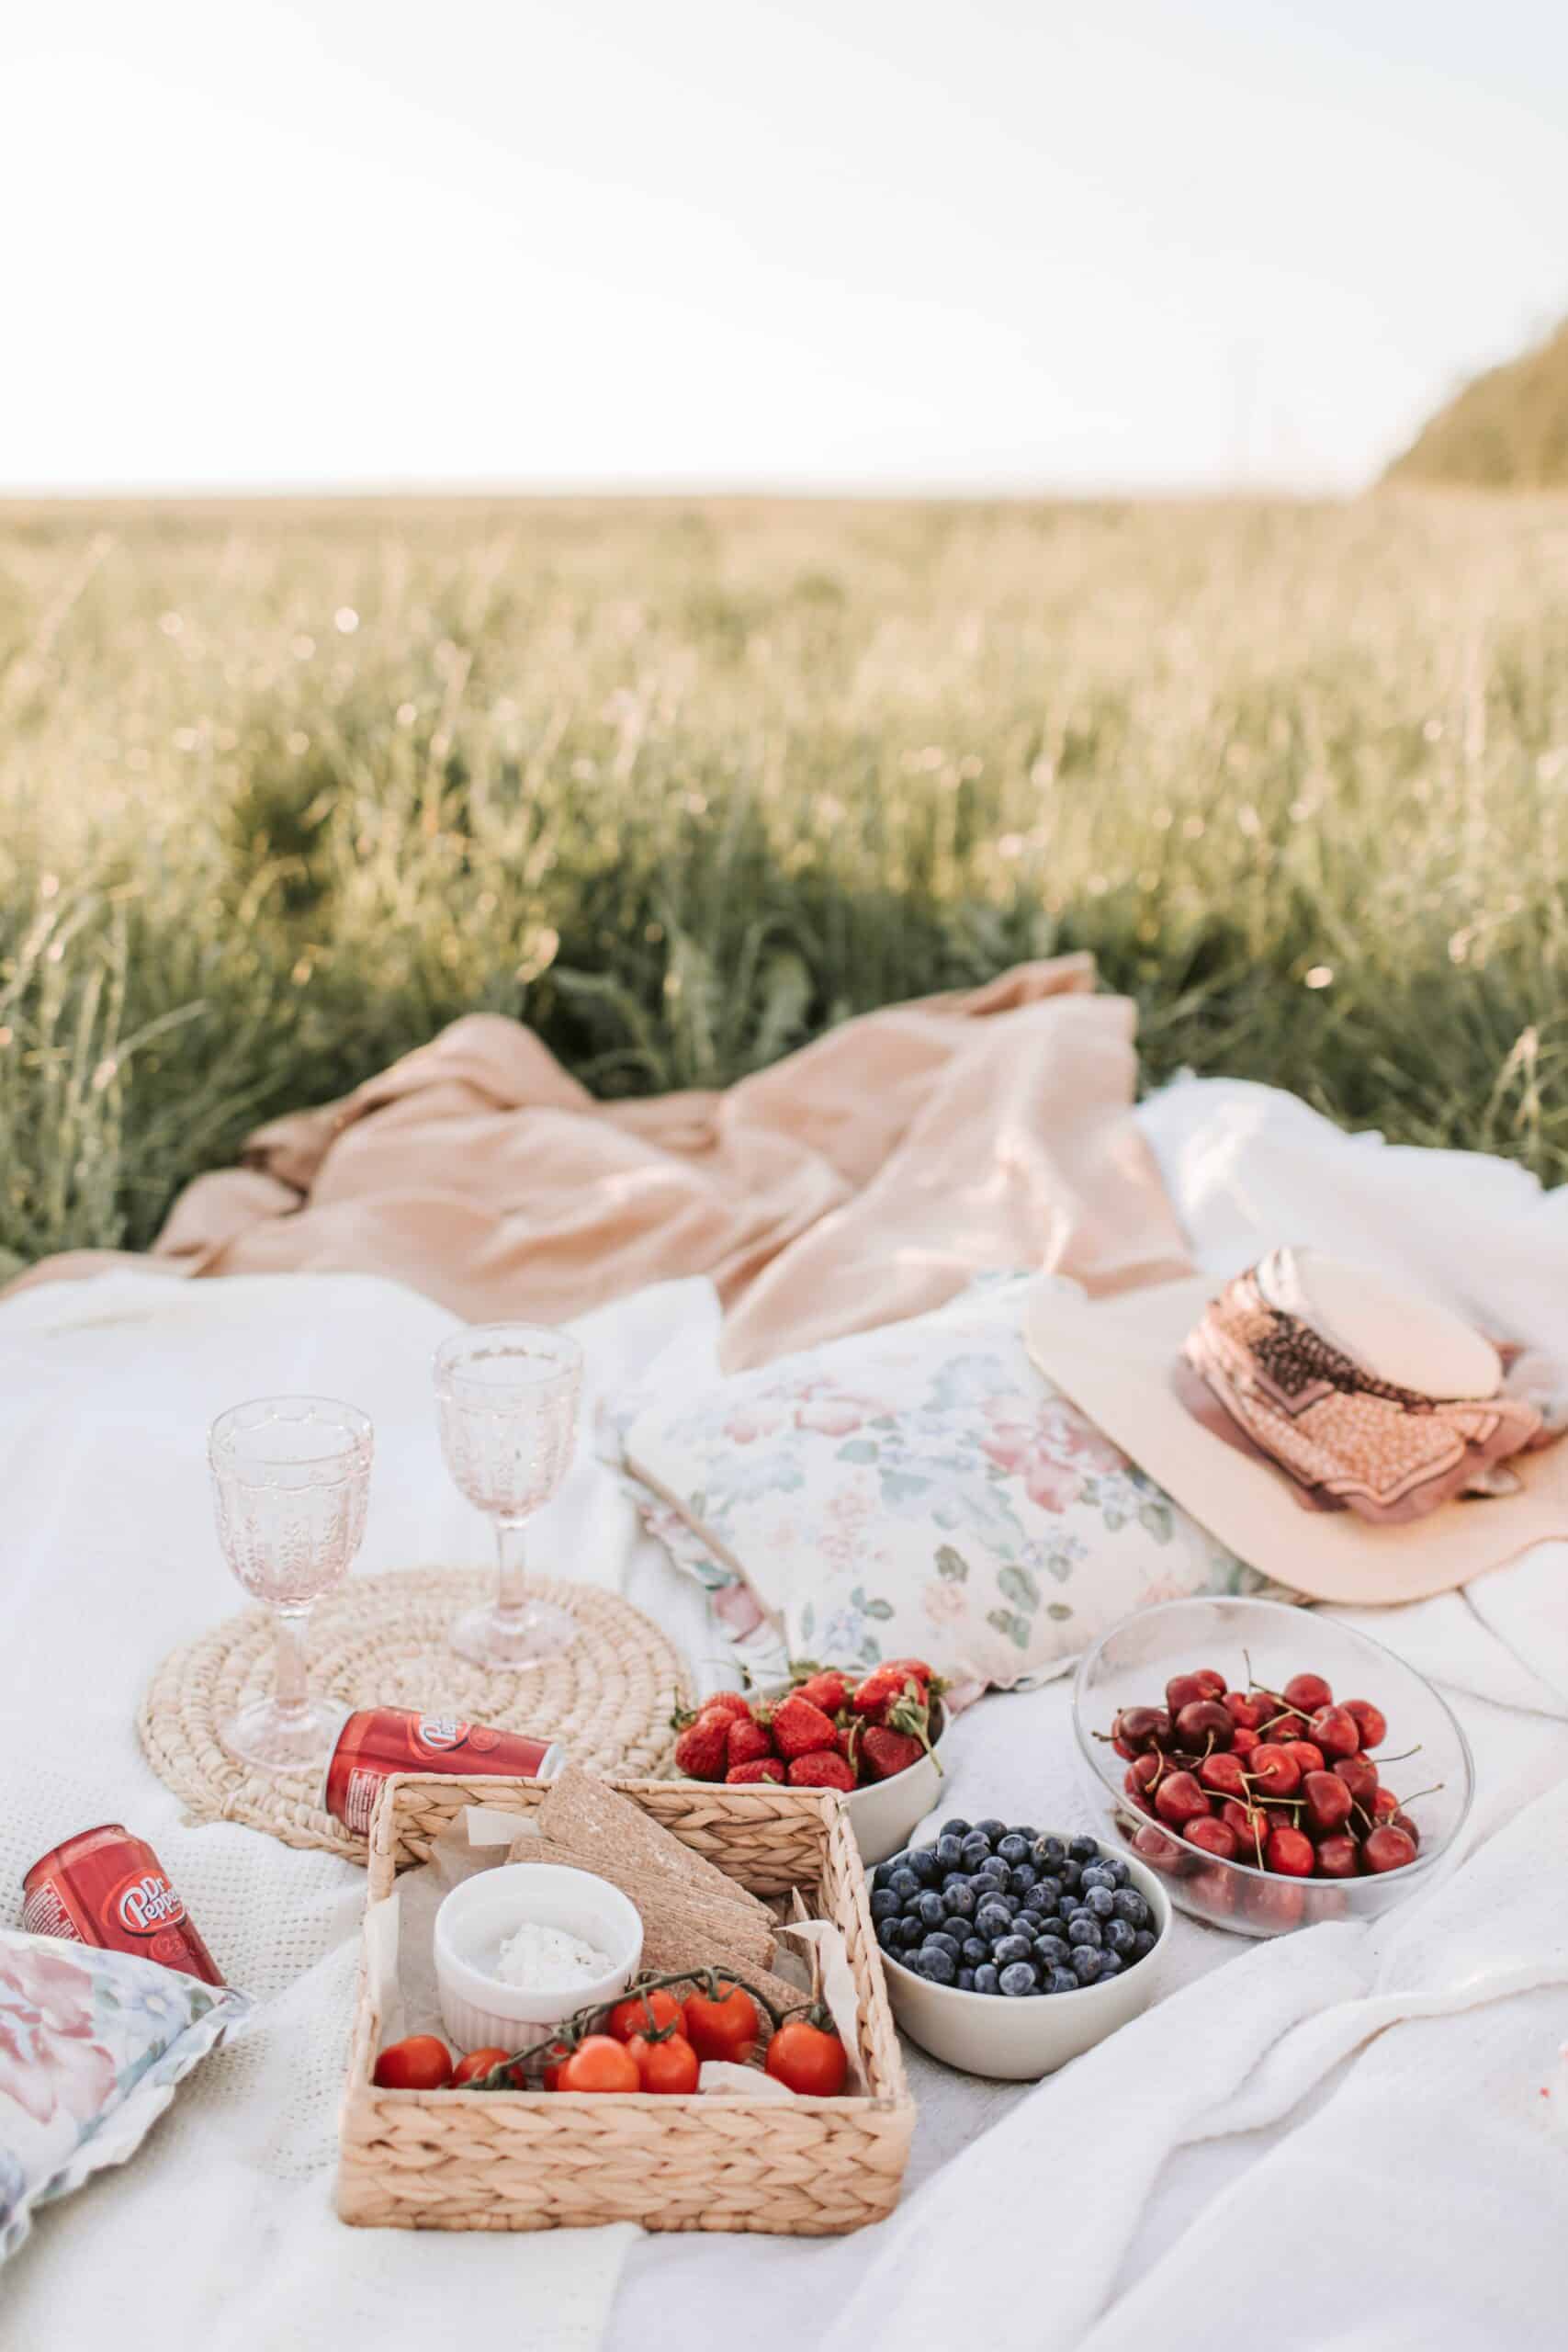 How to Have a Lovely Picnic